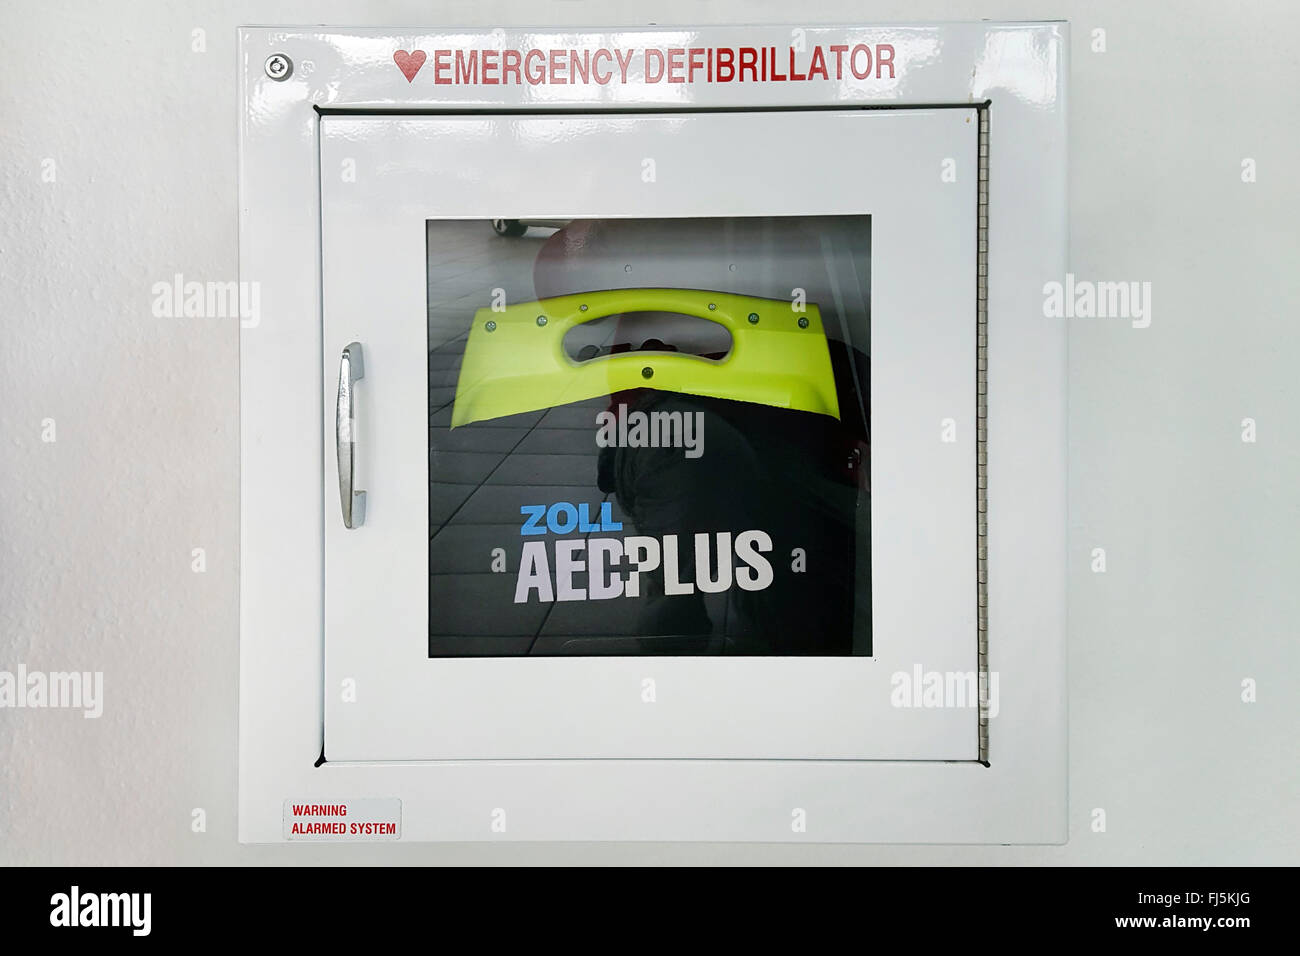 publicly accessible automated external defibrillator Stock Photo